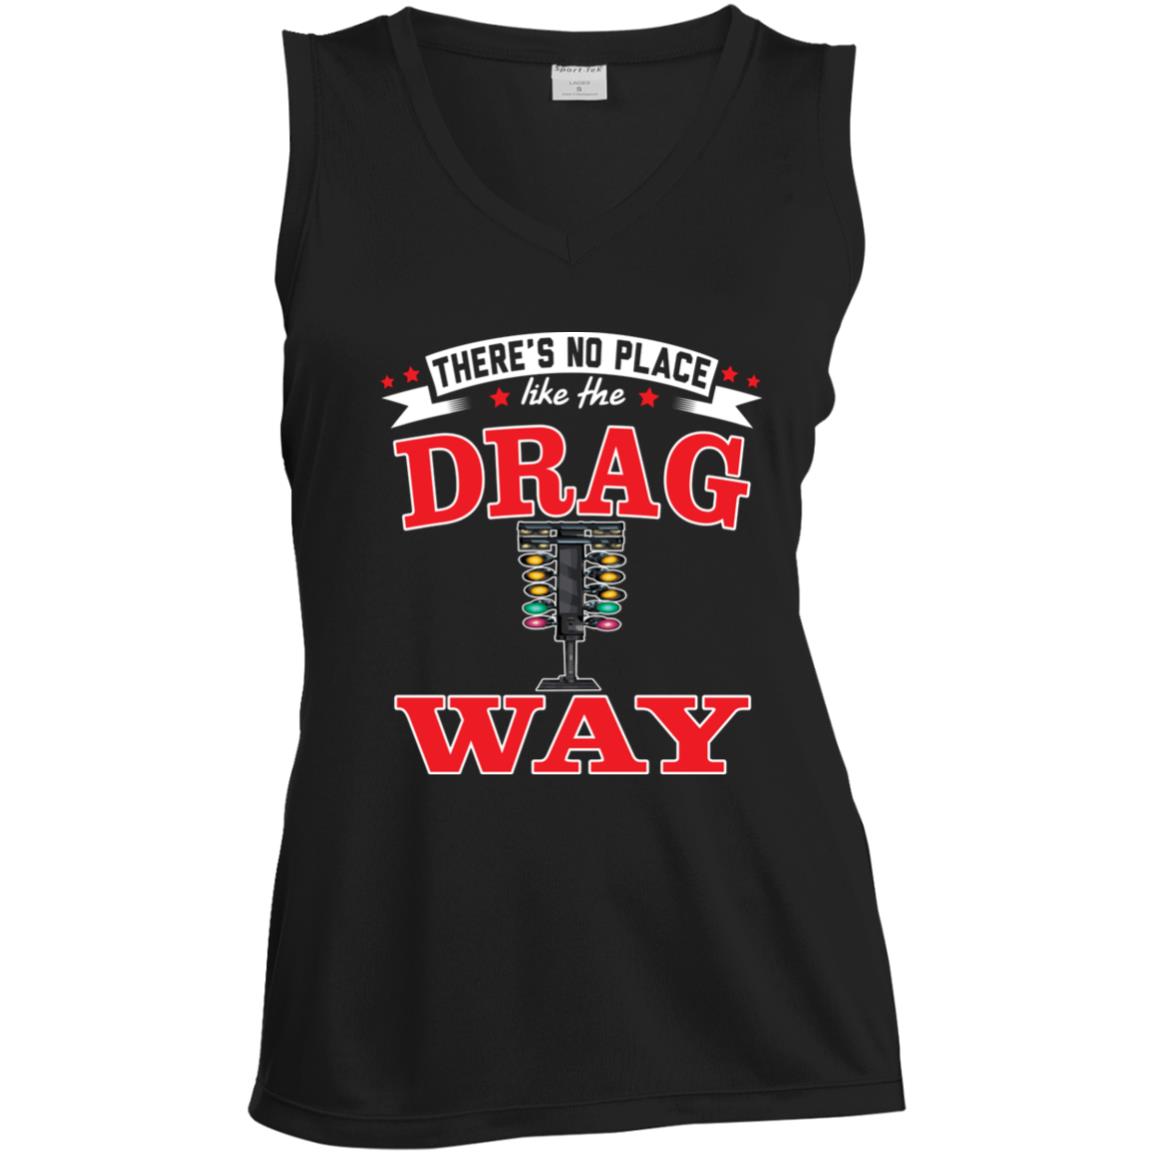 There's No Place Like The Dragway Women's Sleeveless V-Neck Performance Tee